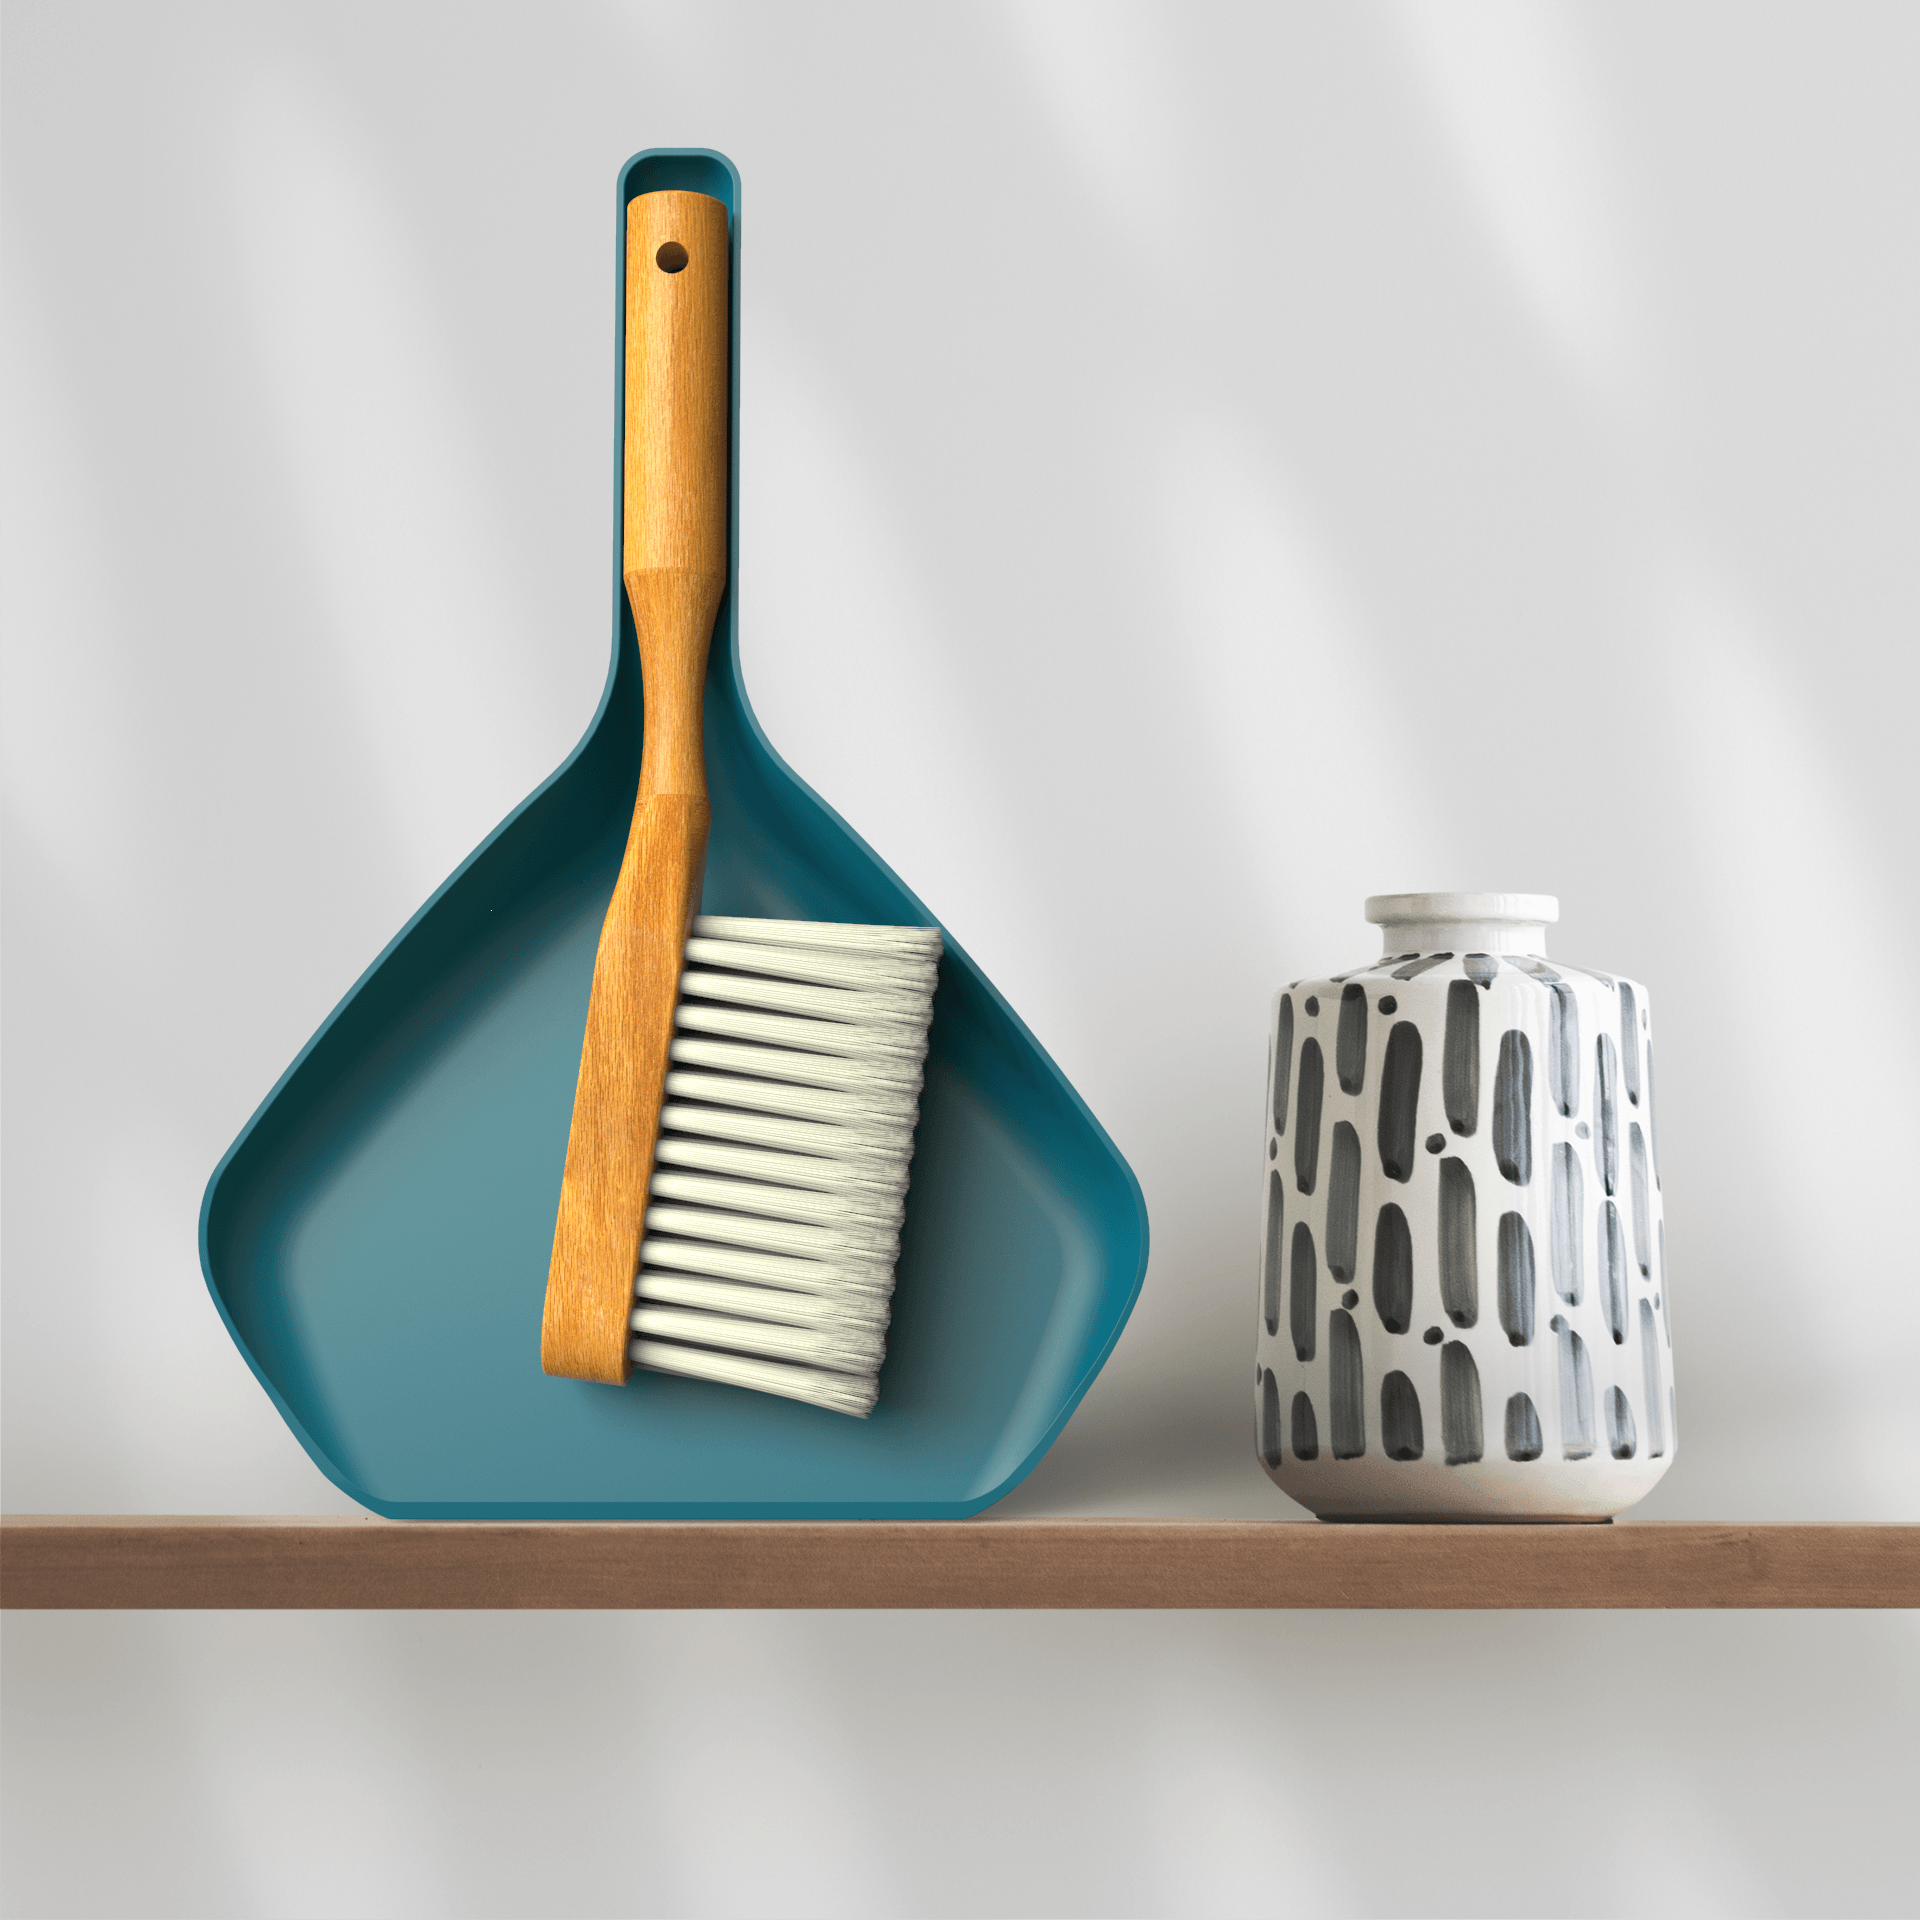 Lady Stendal - Lady Dustpan and broom